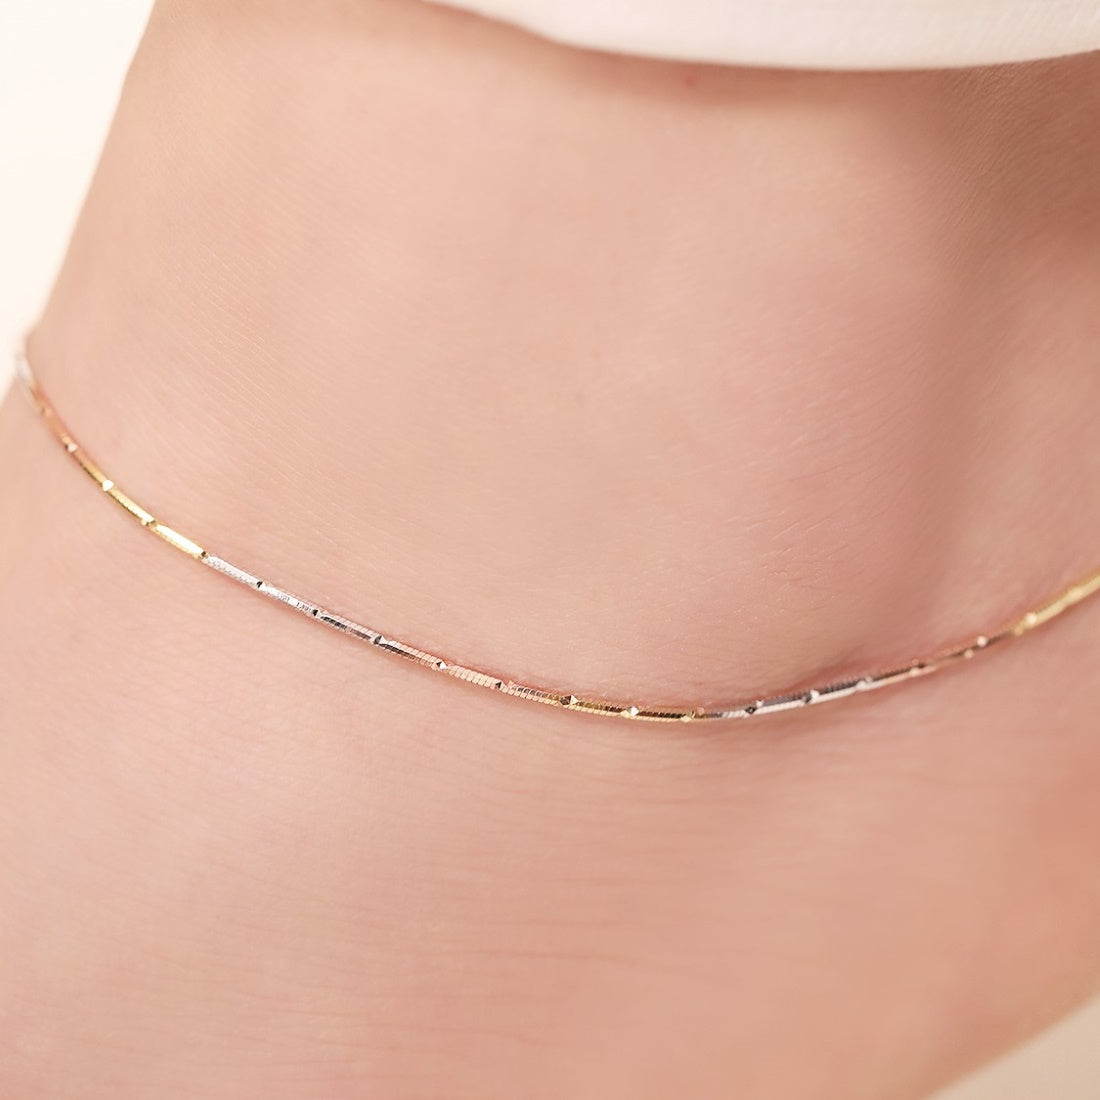 Adorable Triple Tone 925 Sterling Silver Anklet